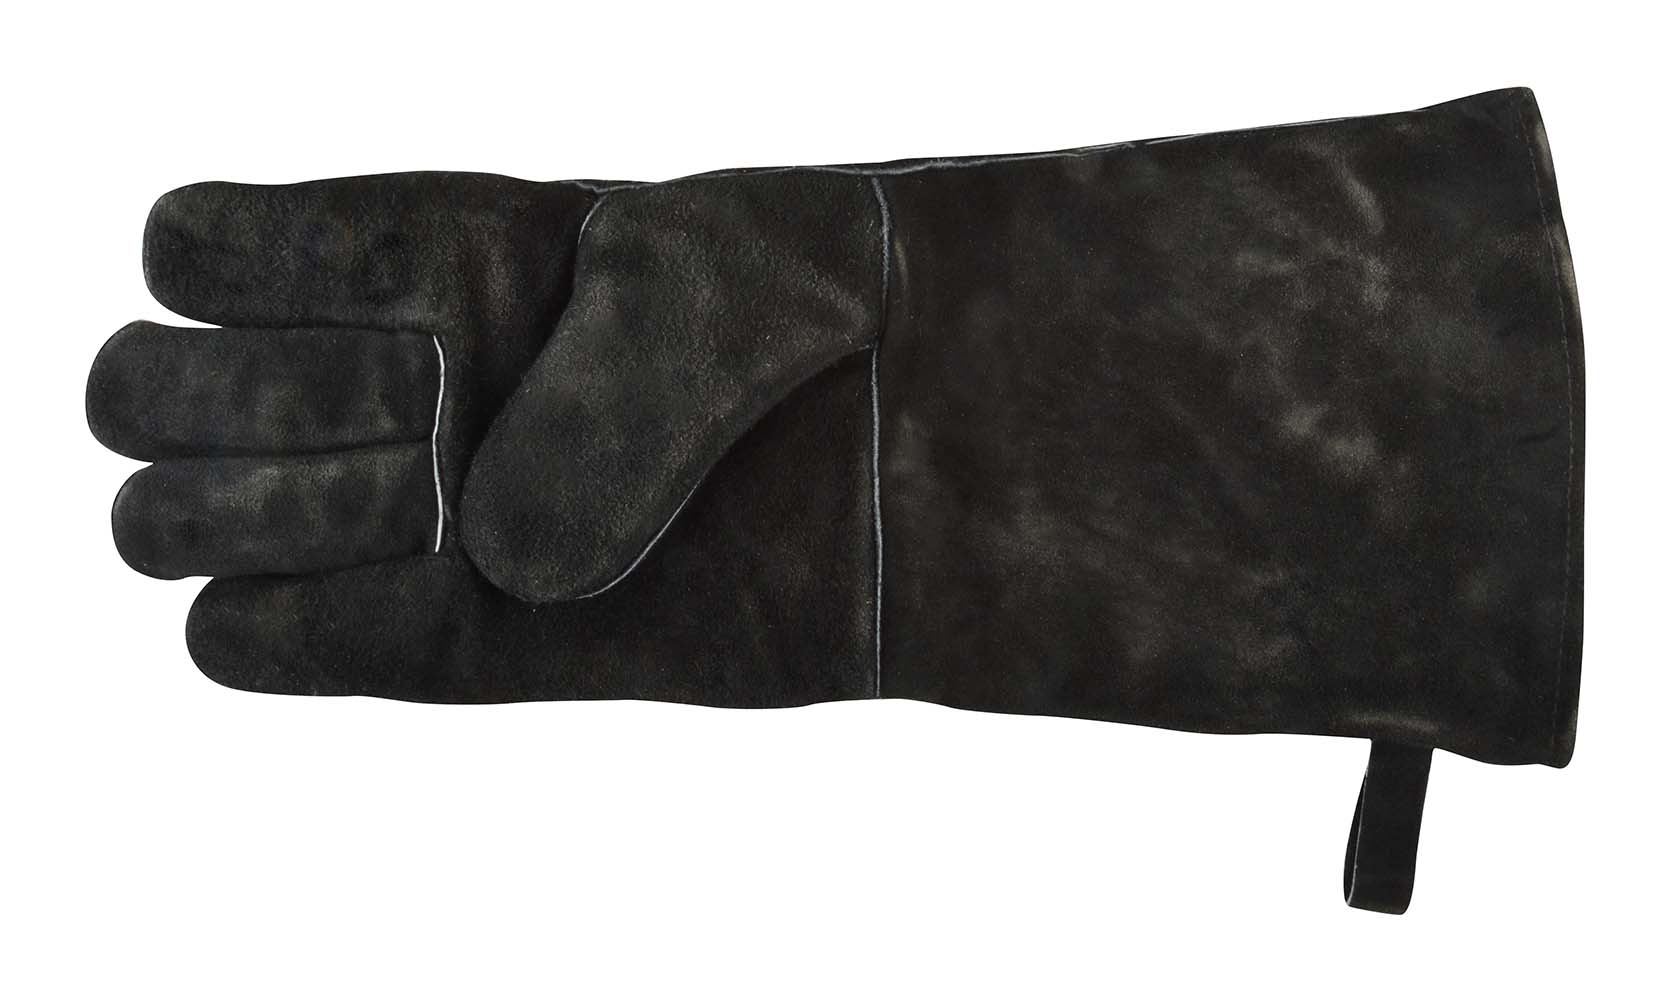 No Label - Barbecue - Leather glove - Long